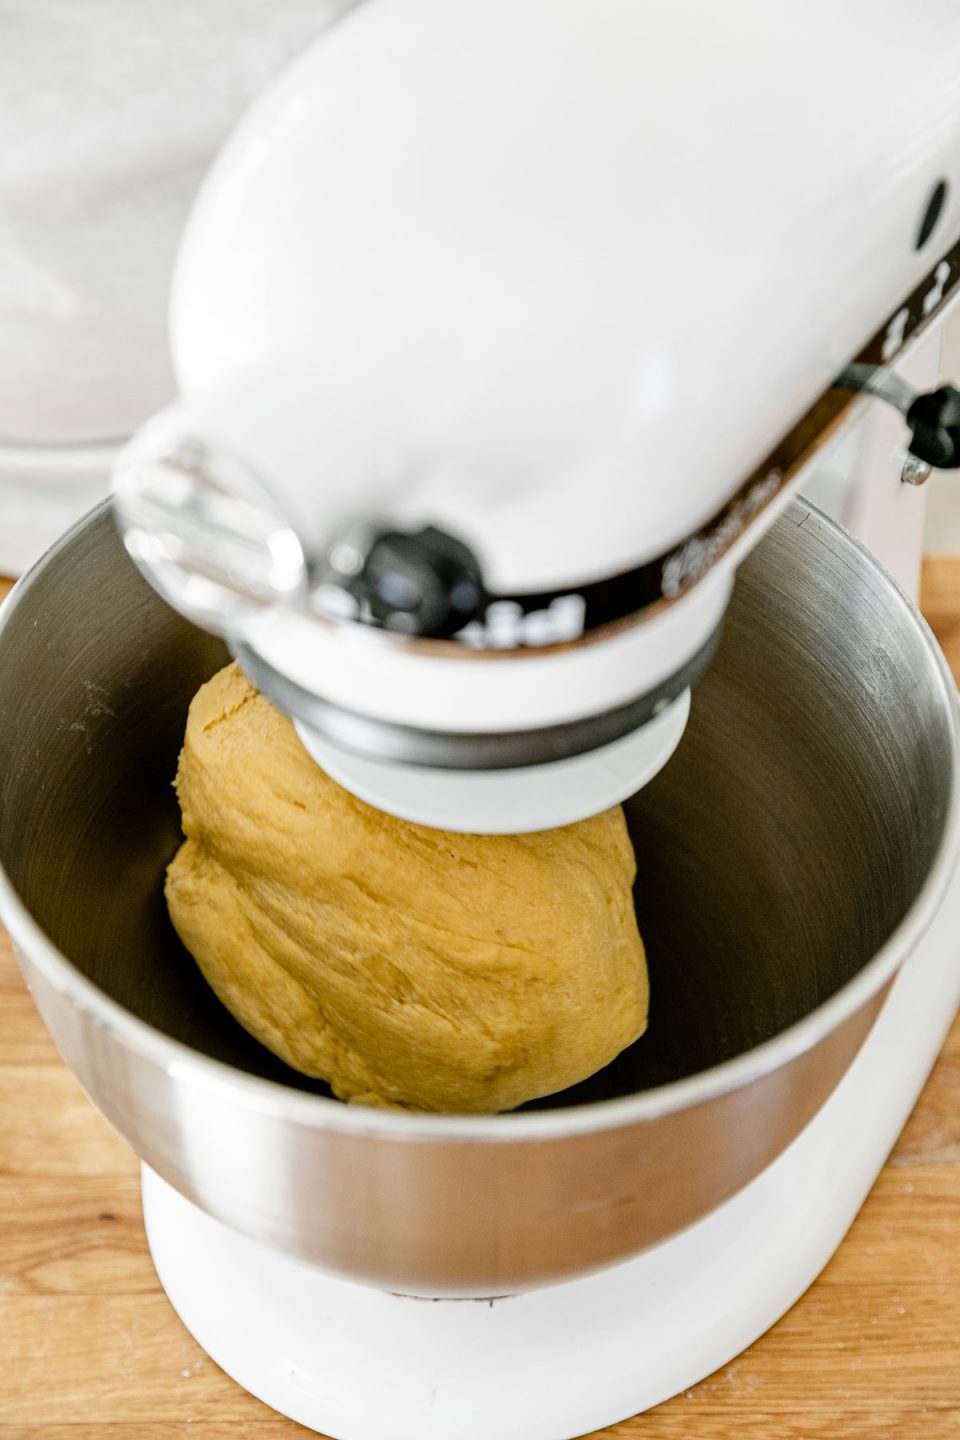 How to Make Fresh Pasta Dough with a Stand Mixer, Step 2: Mix the pasta dough. A KitchenAid Stand Mixer with the dough hook attachment connected is turned on and being used to knead fresh pasta dough that is forming within the mixing bowl. The stand mixer rests atop a butcher block countertop.